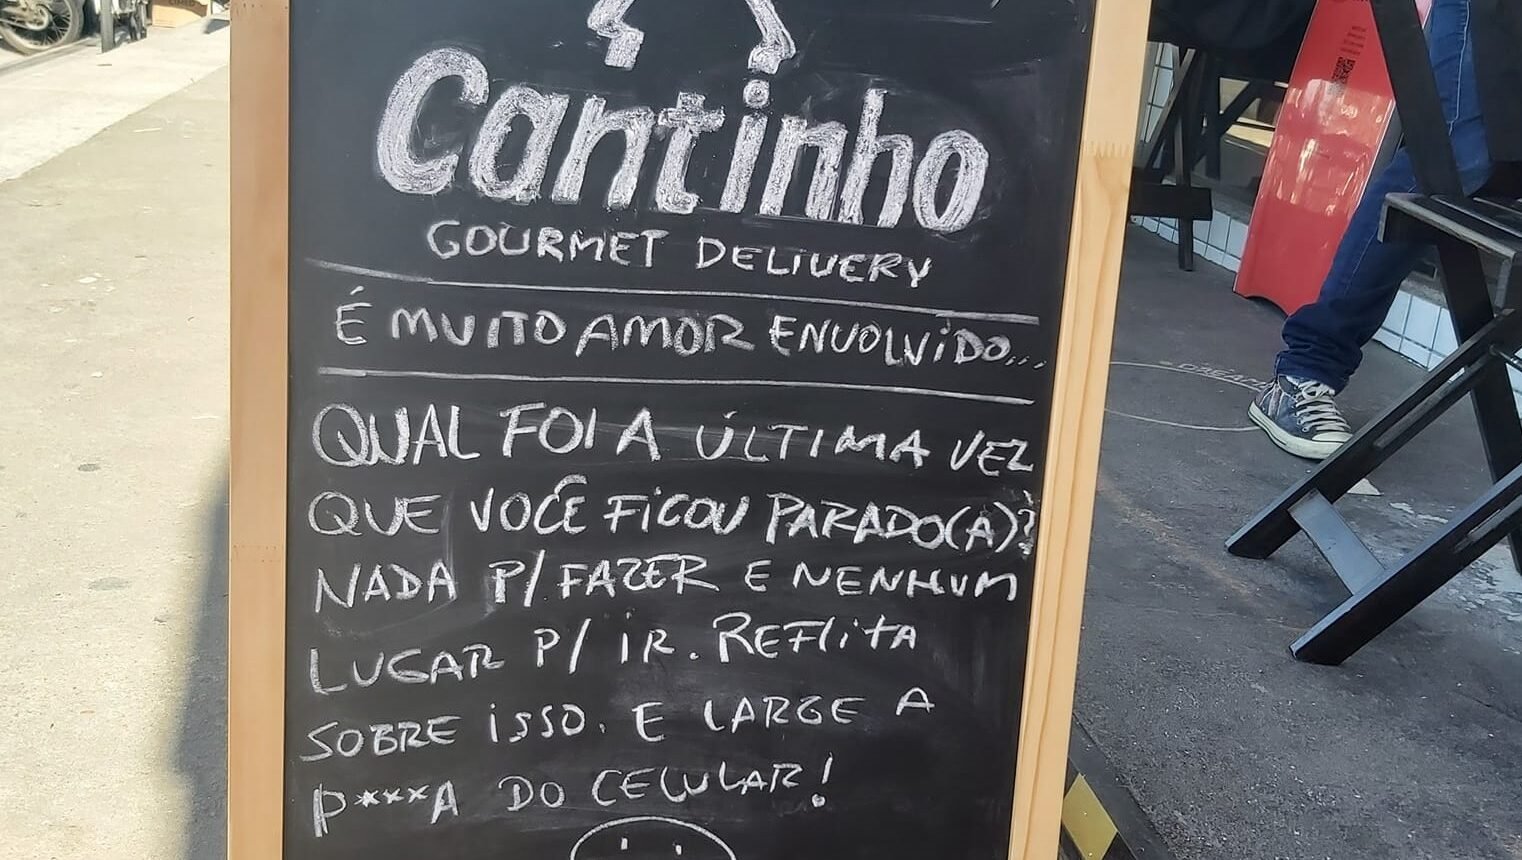 Cantinho Gourmet Delivery